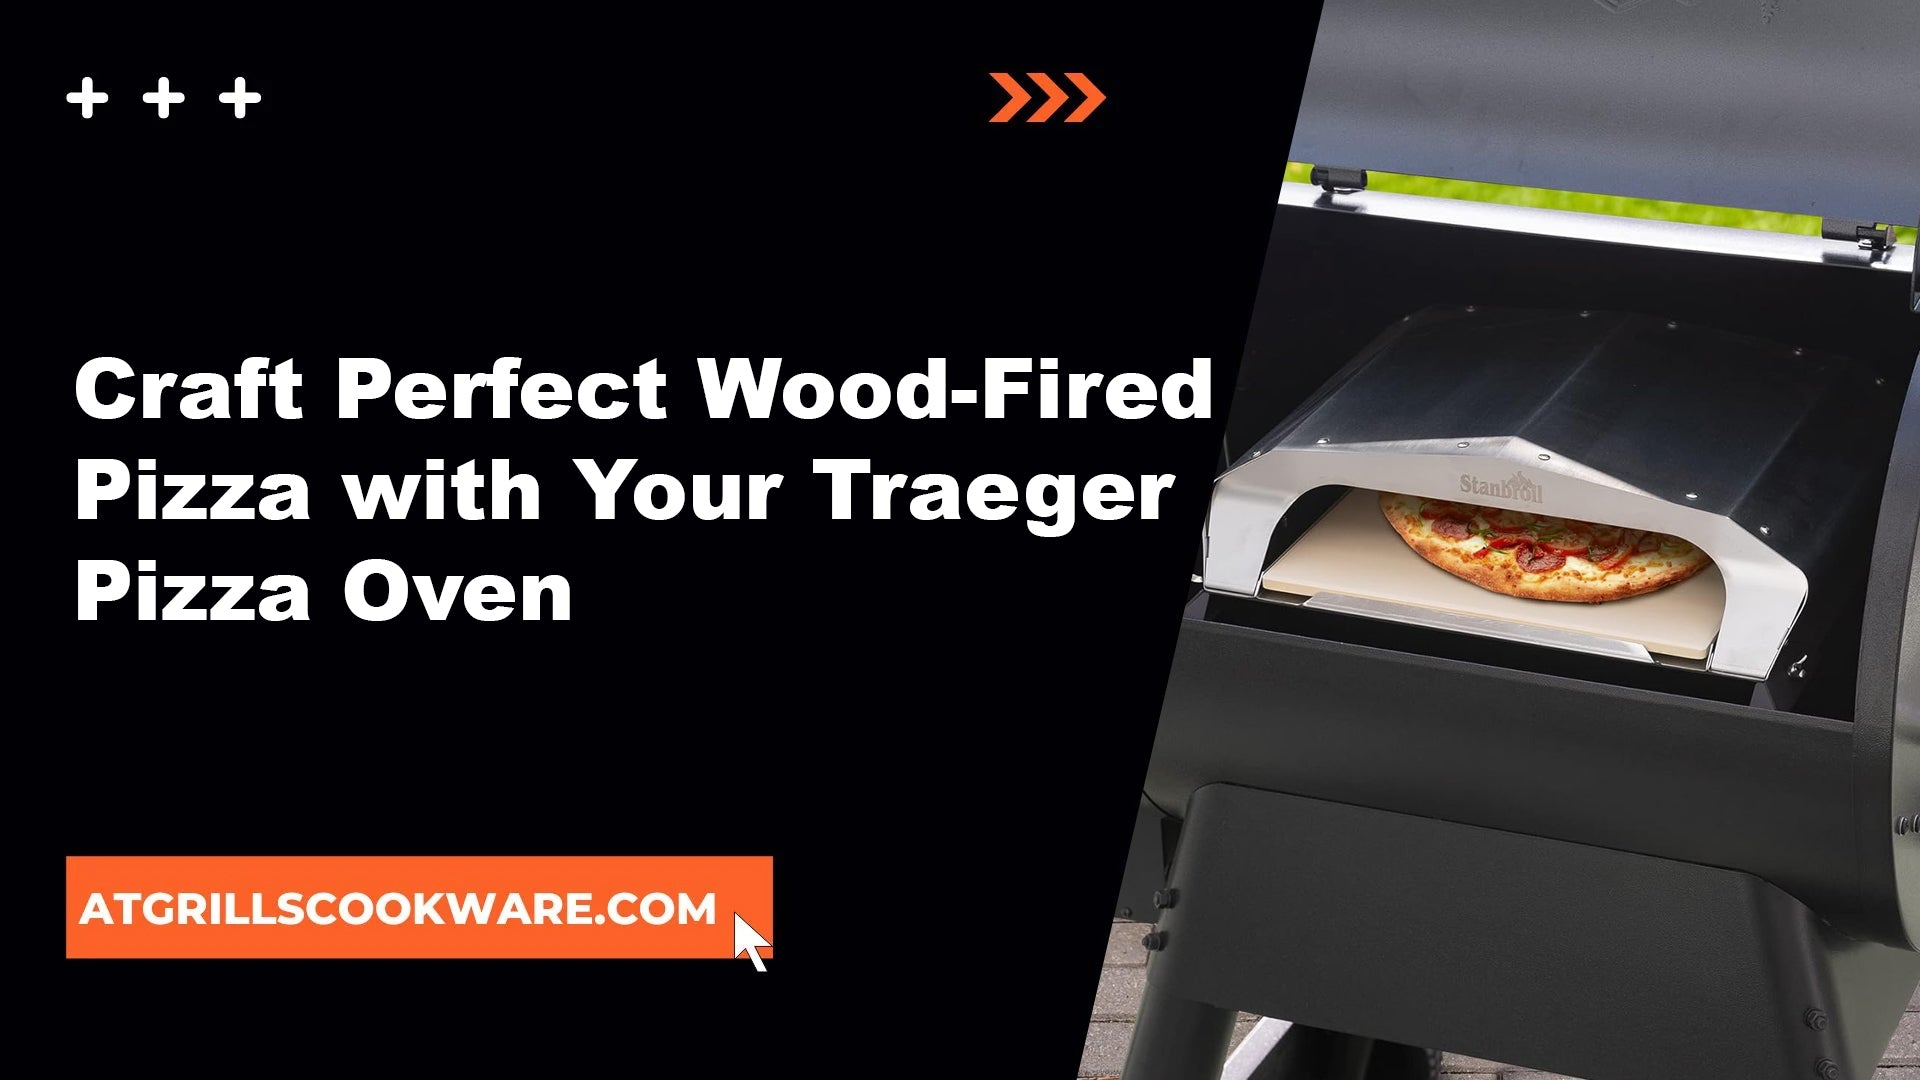 How to Make Authentic Wood-Fired Pizza Using Your Traeger Pizza Oven